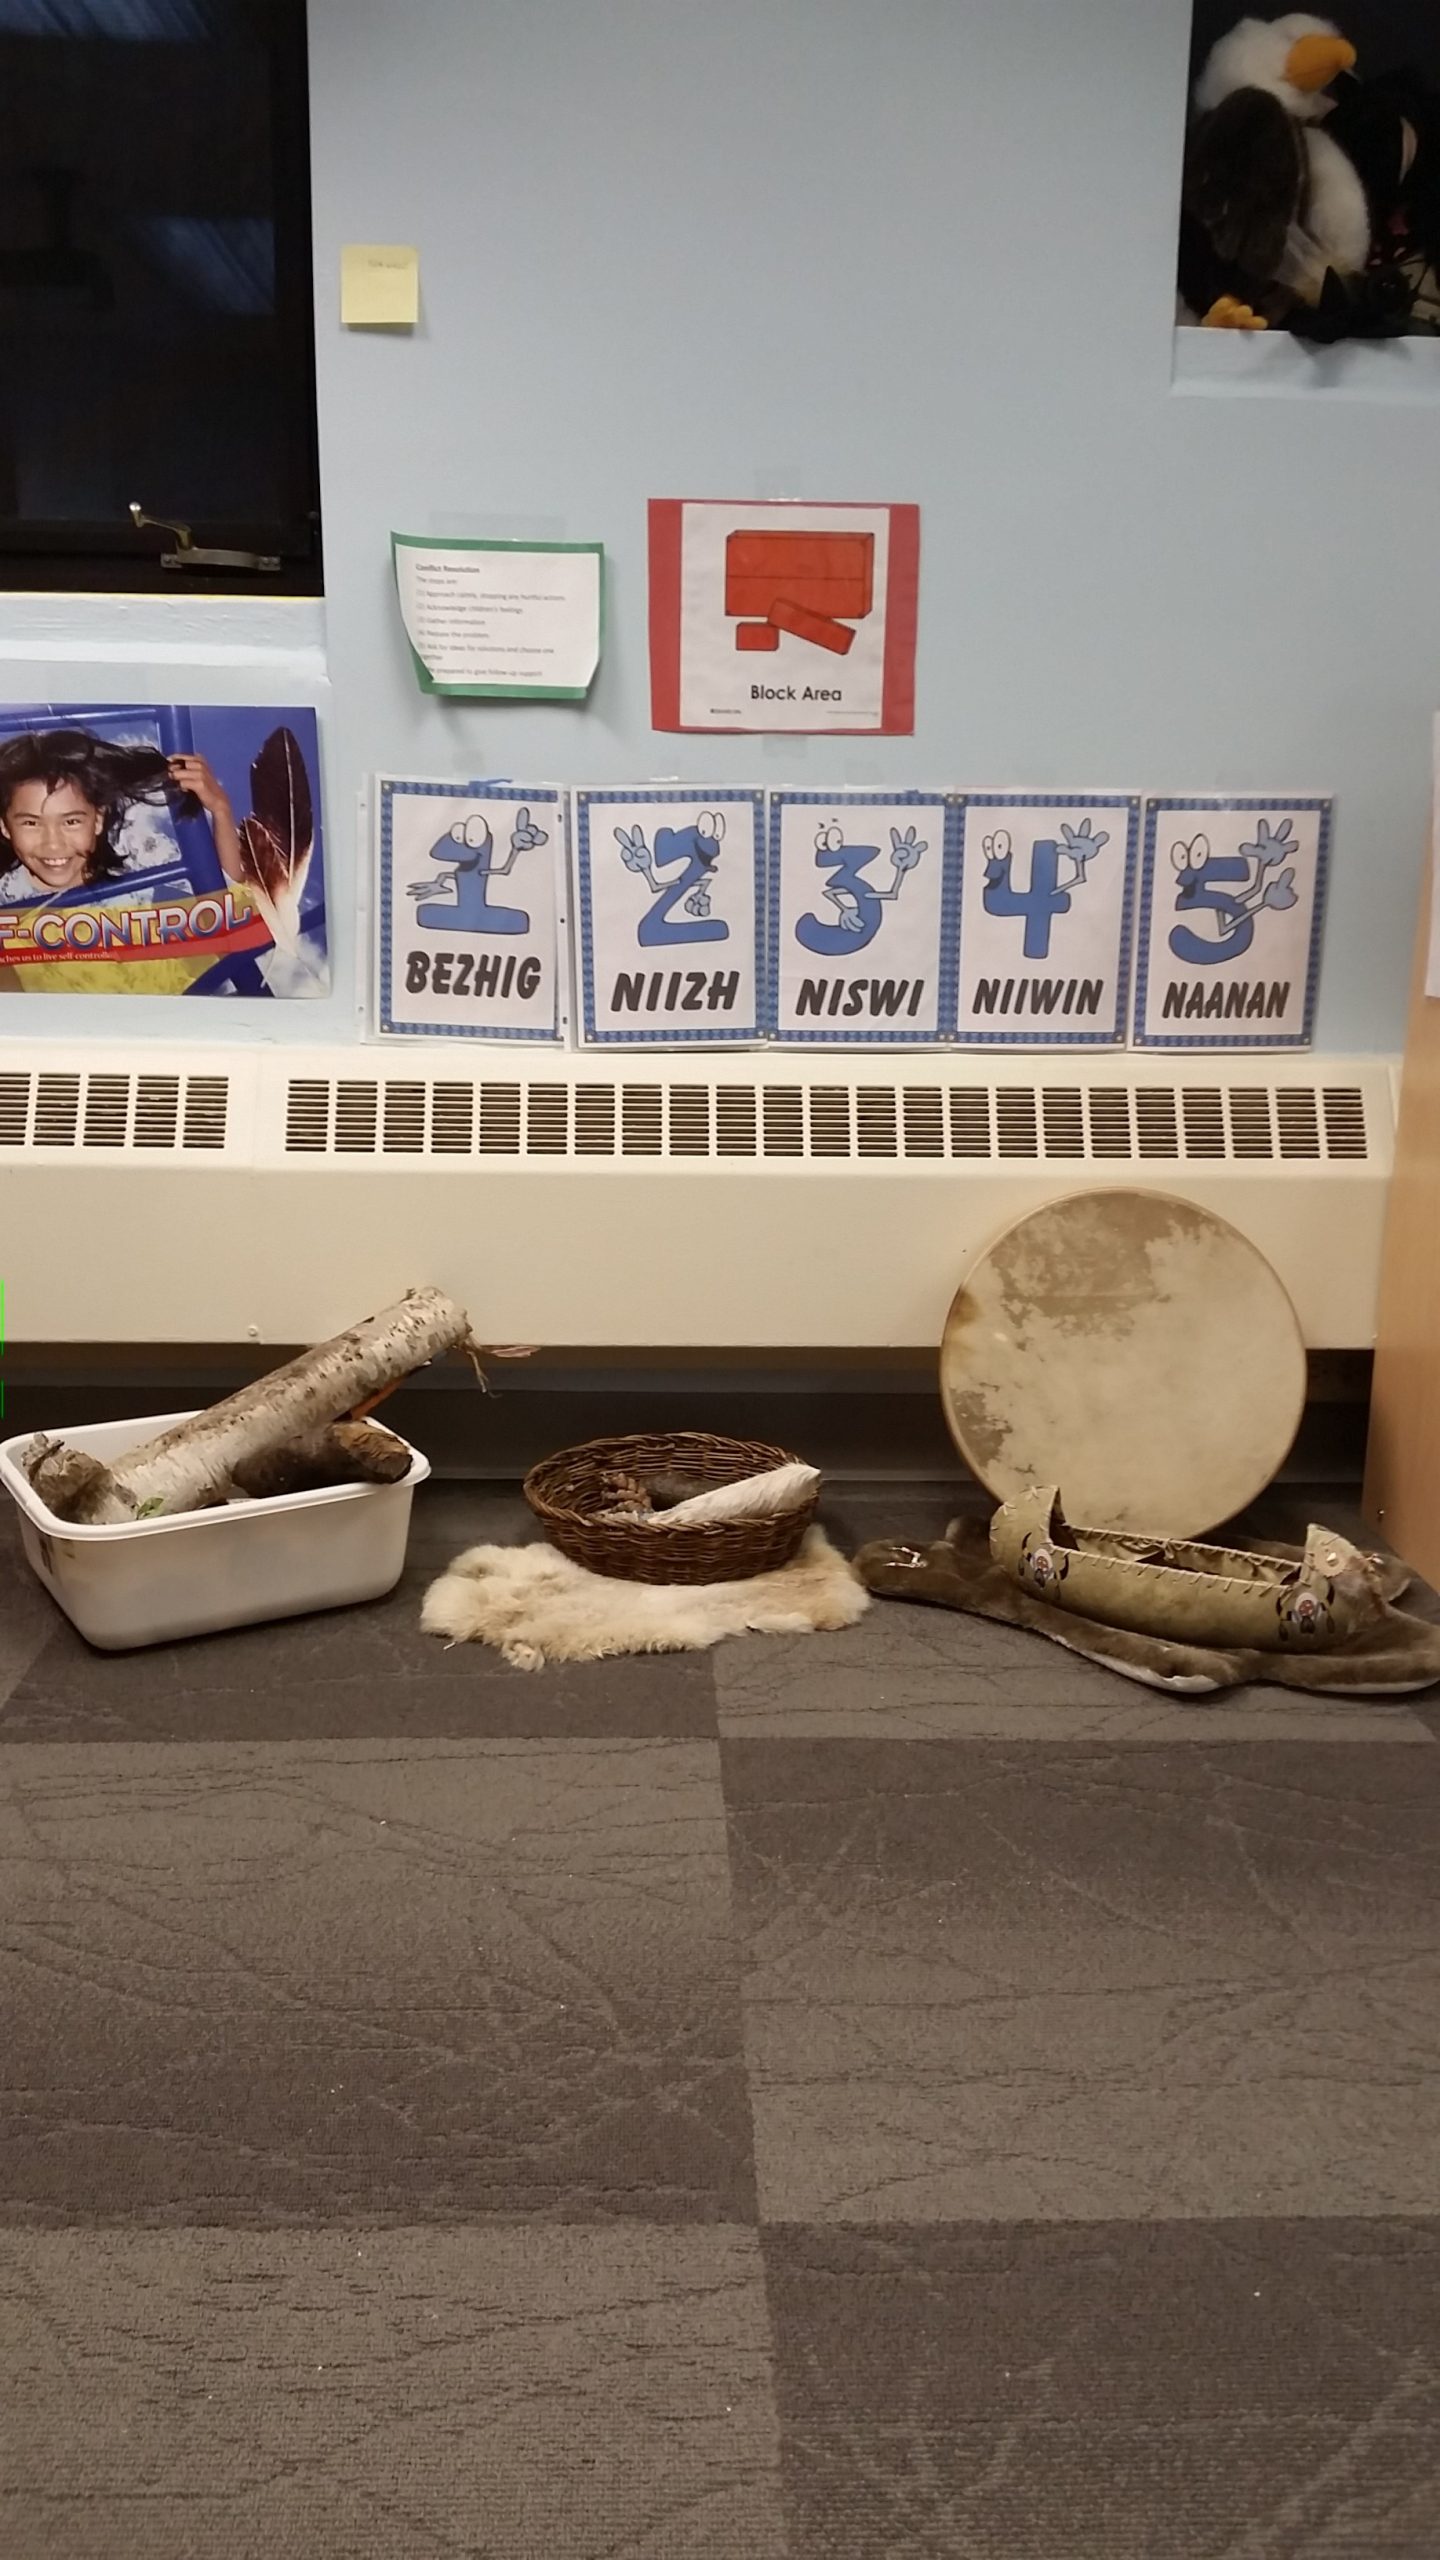 Anishinaabe drums, shakers, art work, and cultural materials